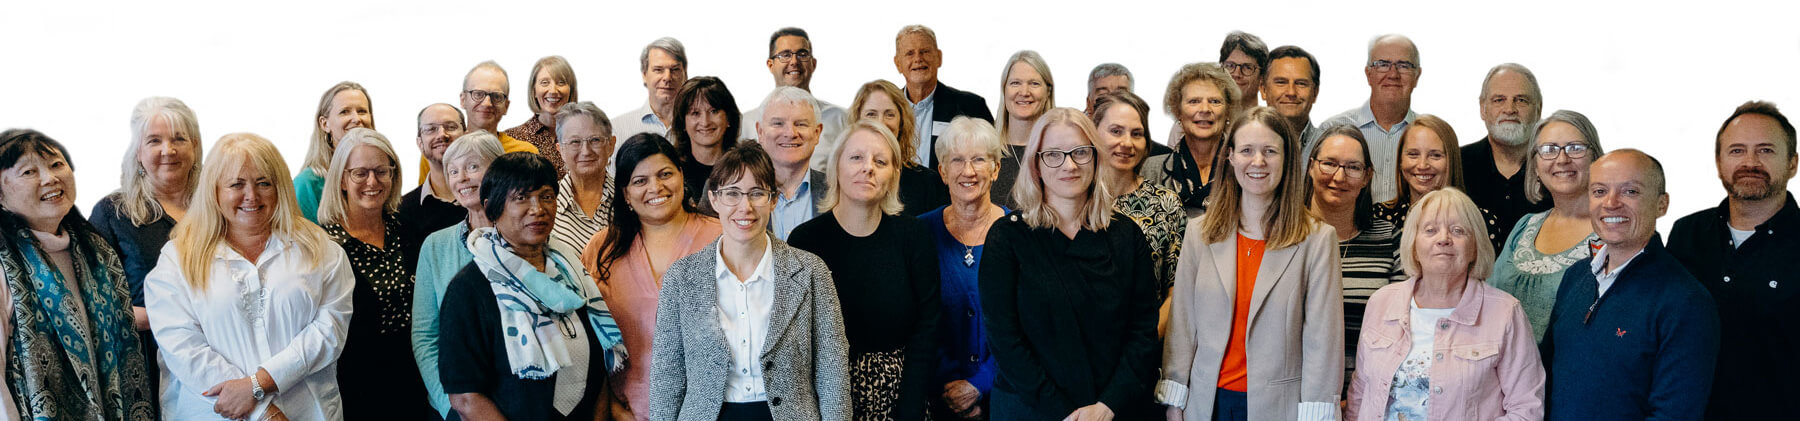 Charity Consultants - The Action Planning Team